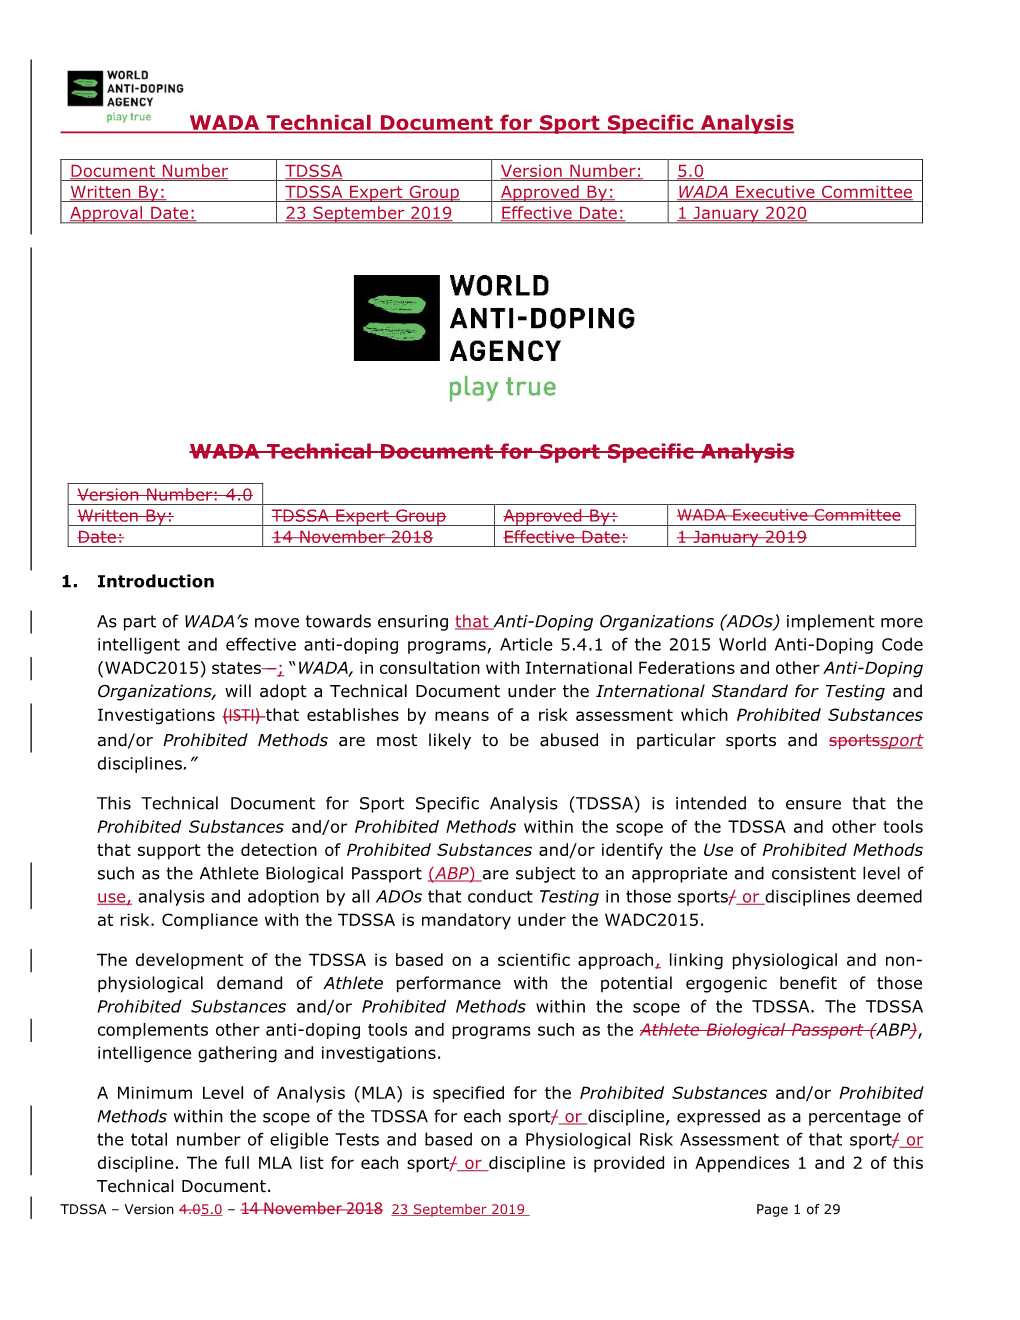 TDSSA Version Number: 5.0 Written By: TDSSA Expert Group Approved By: WADA Executive Committee Approval Date: 23 September 2019 Effective Date: 1 January 2020